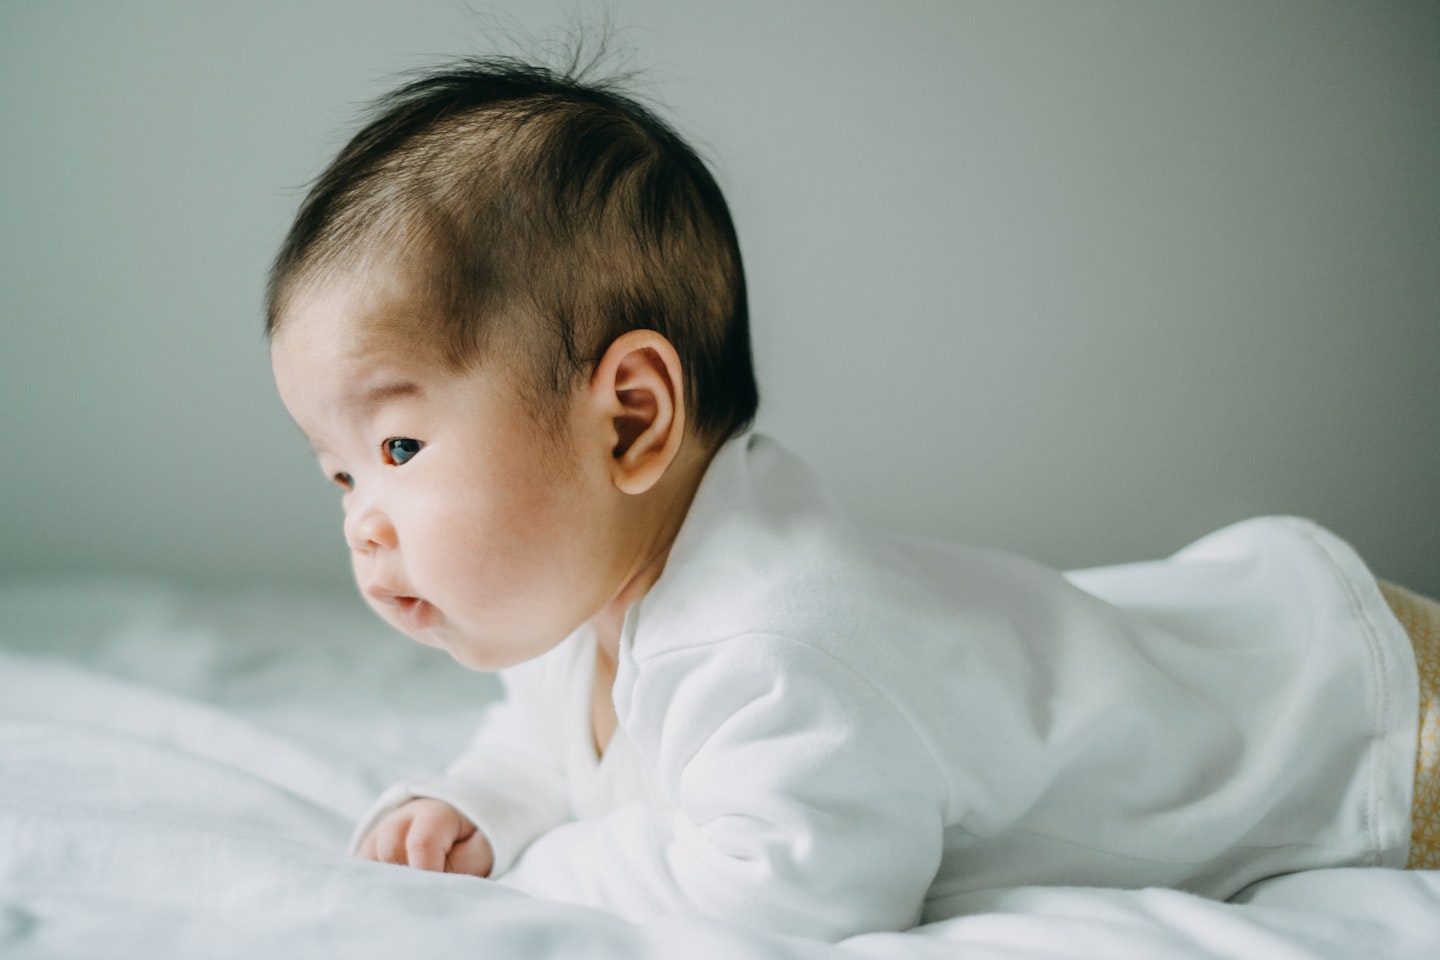 Your guide to tummy time for babies